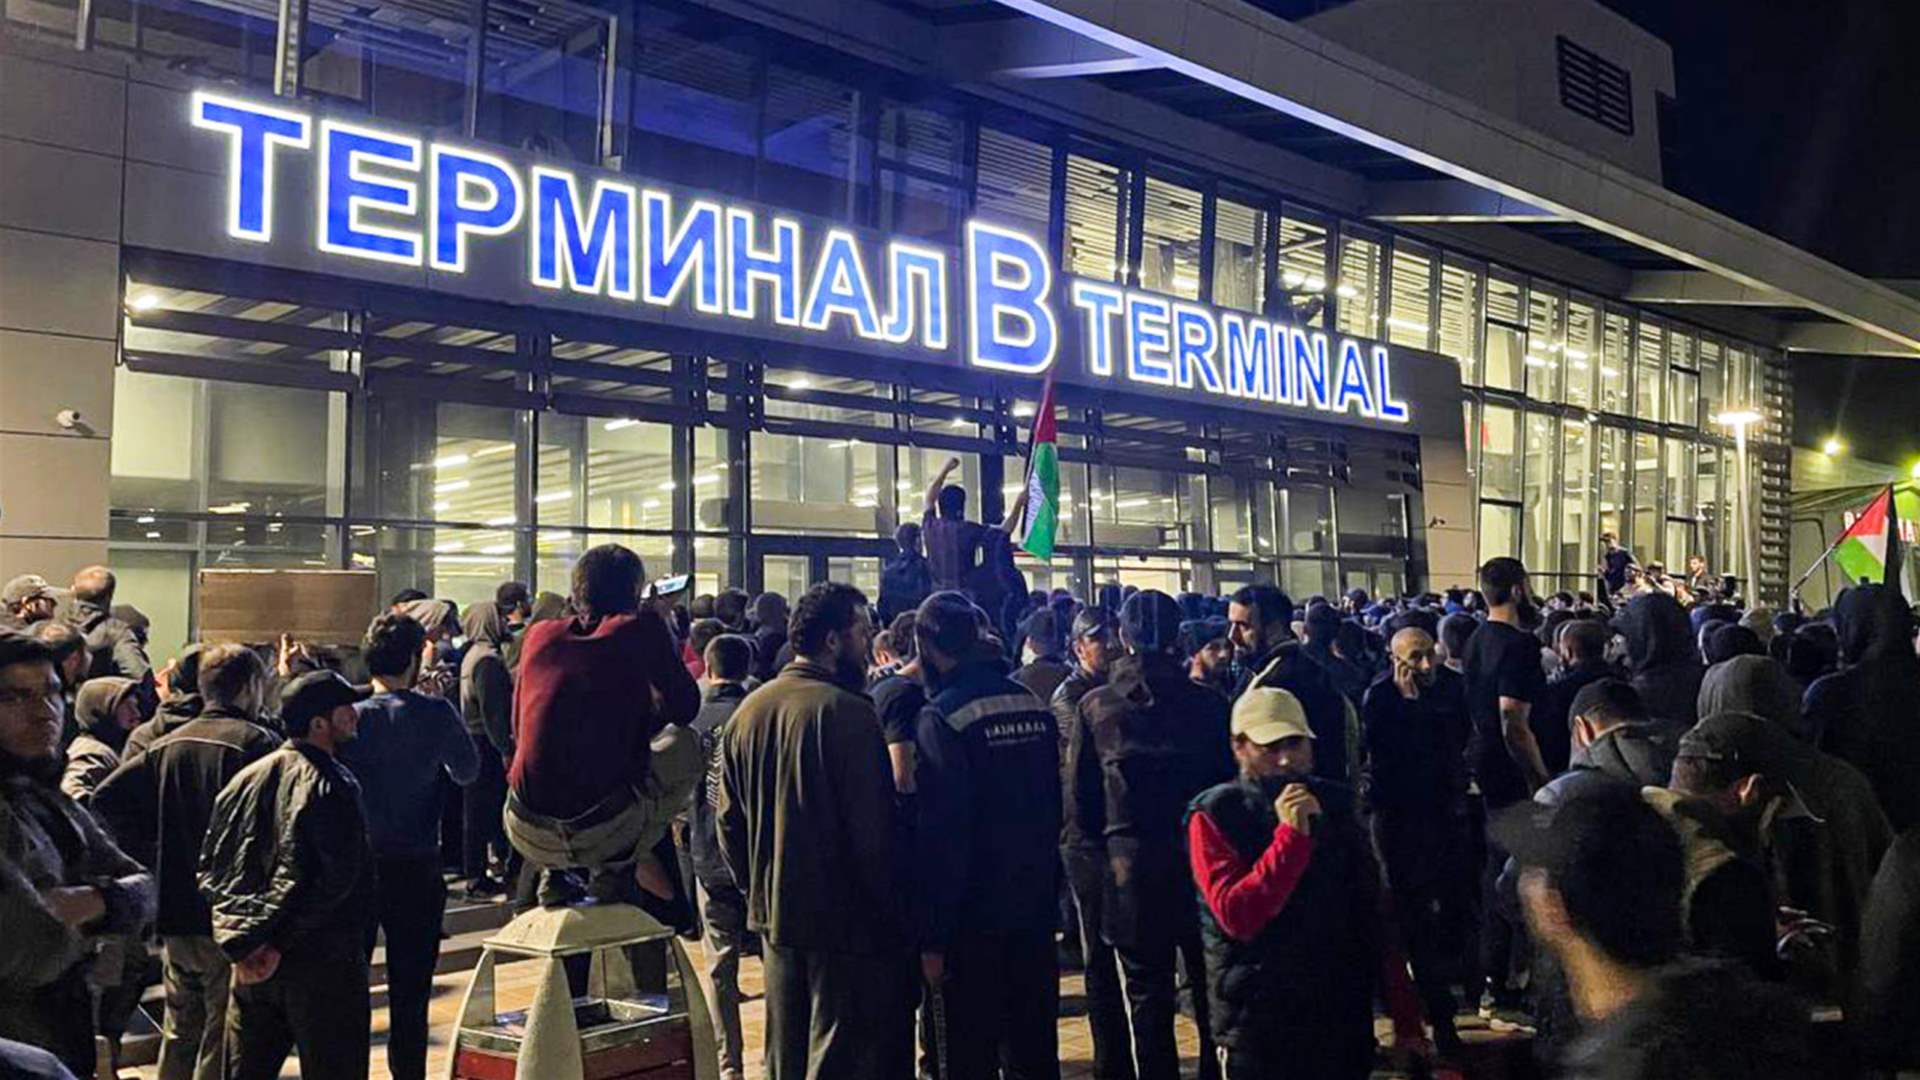 Dagestan Airport incident: Safety concerns for Jewish communities